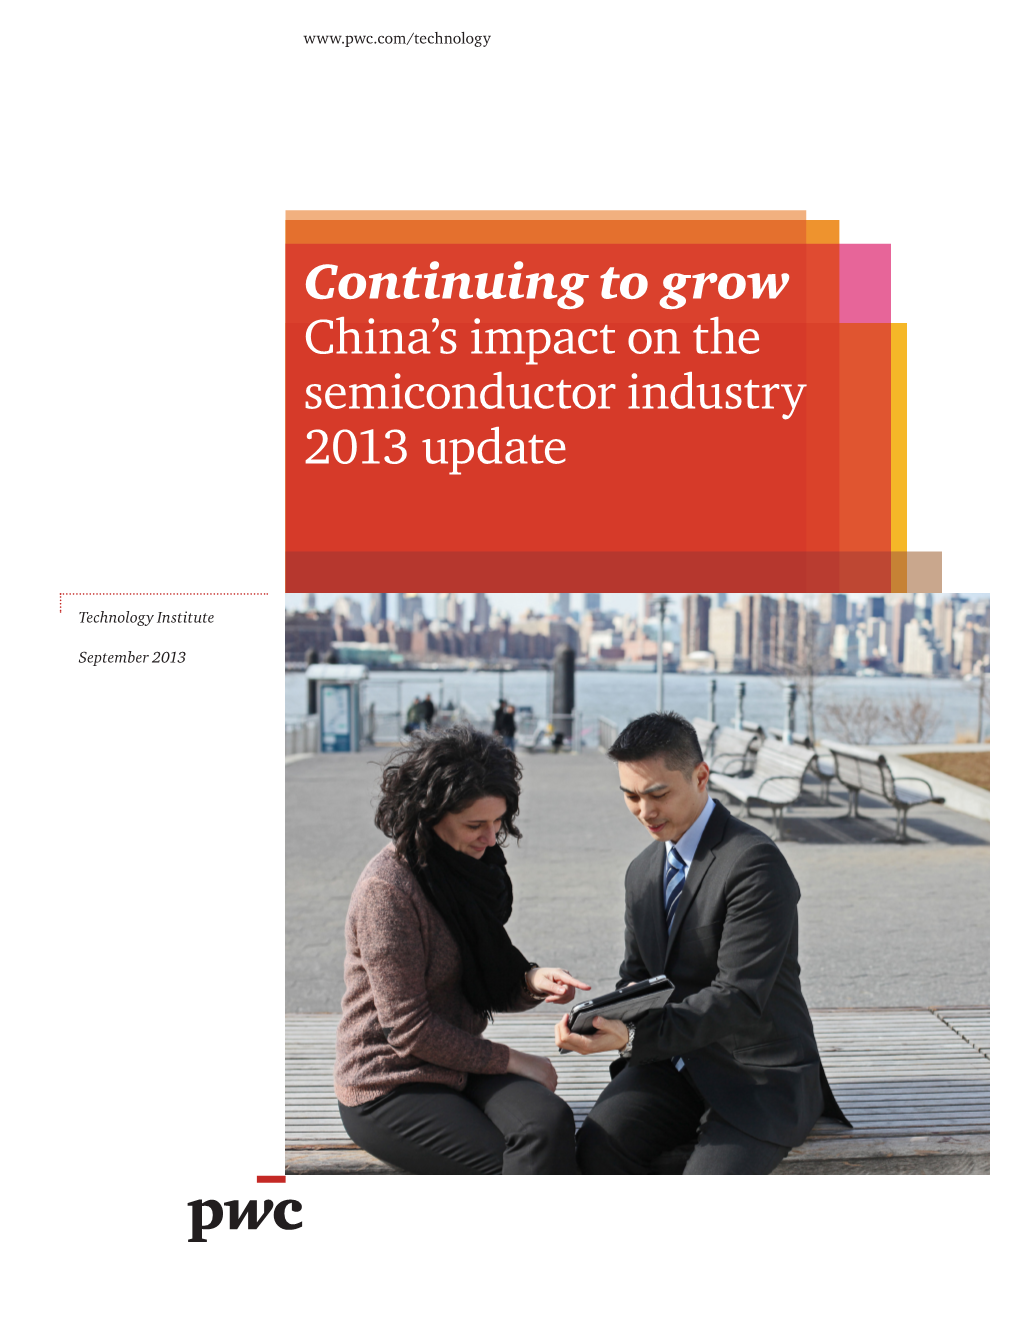 Continuing to Grow China's Impact on the Semiconductor Industry 2013 Update